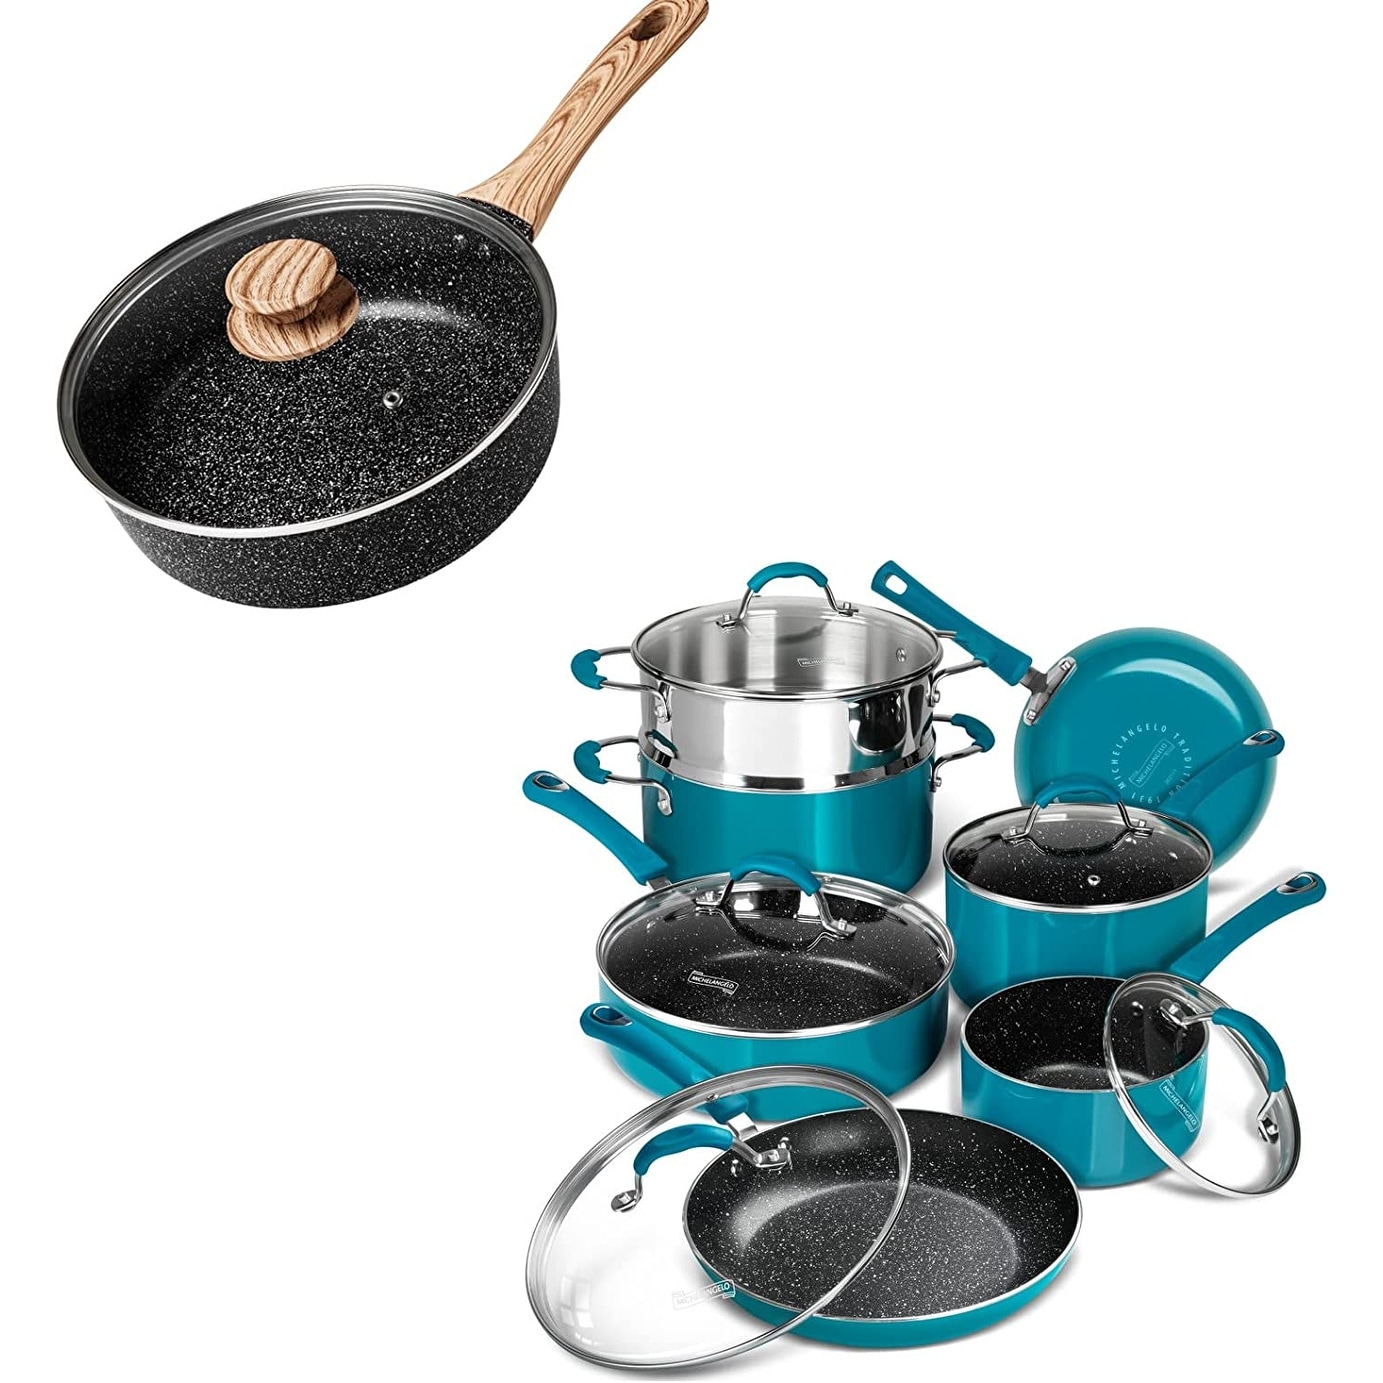 MICHELANGELO Nonstick Pots and Pans Set, Enamel Cookware Set with  Stone-derived Coating, Kitchen Cookware Sets with 5 Utensils, Pots and Pans  with